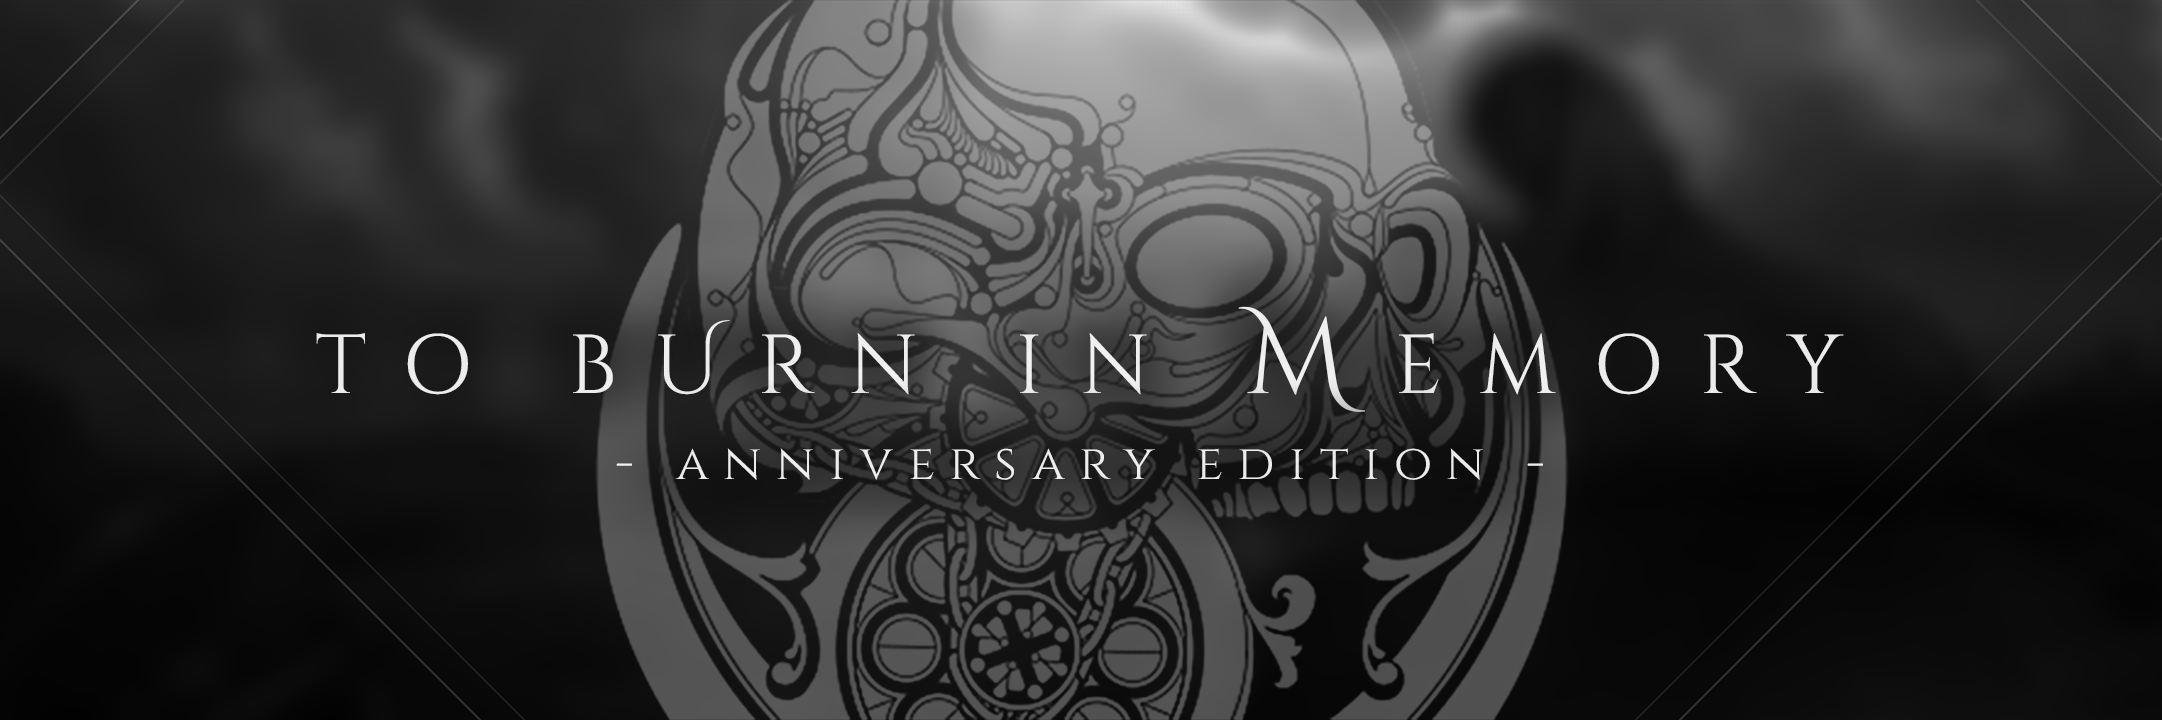 To Burn in Memory (Anniversary Edition)